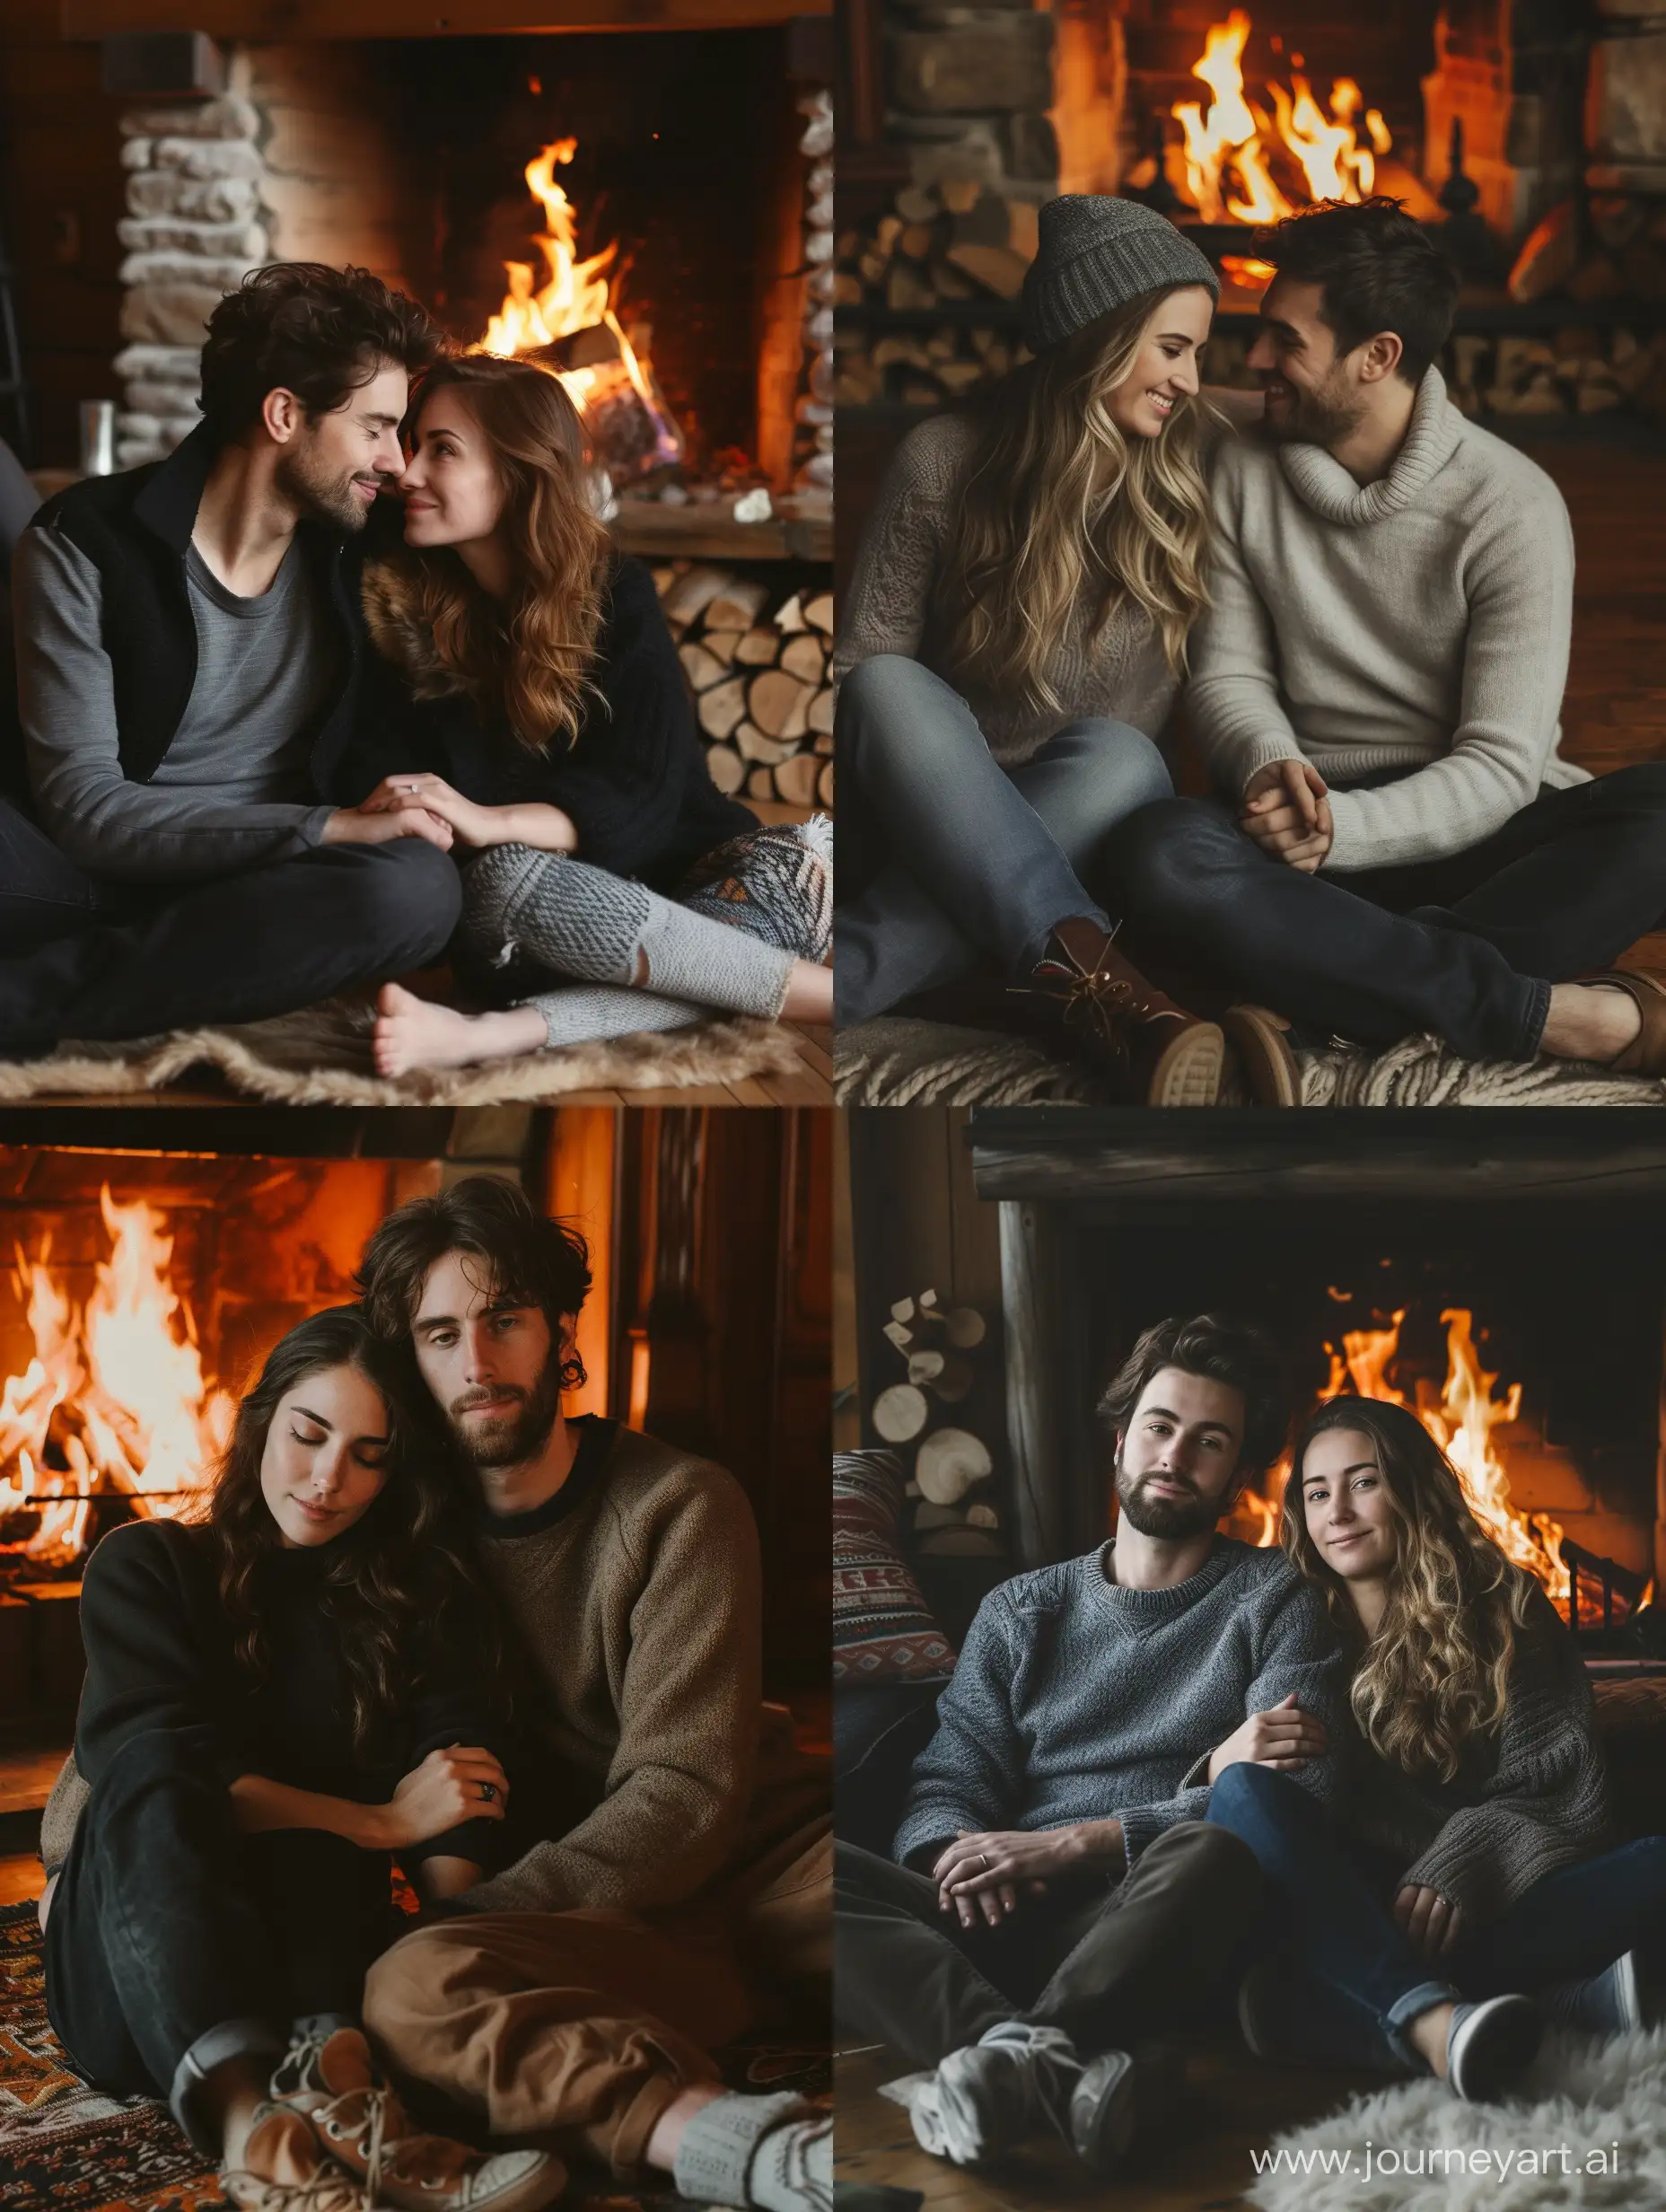 Couple-by-Cozy-Fireplace-in-Romantic-Embrace